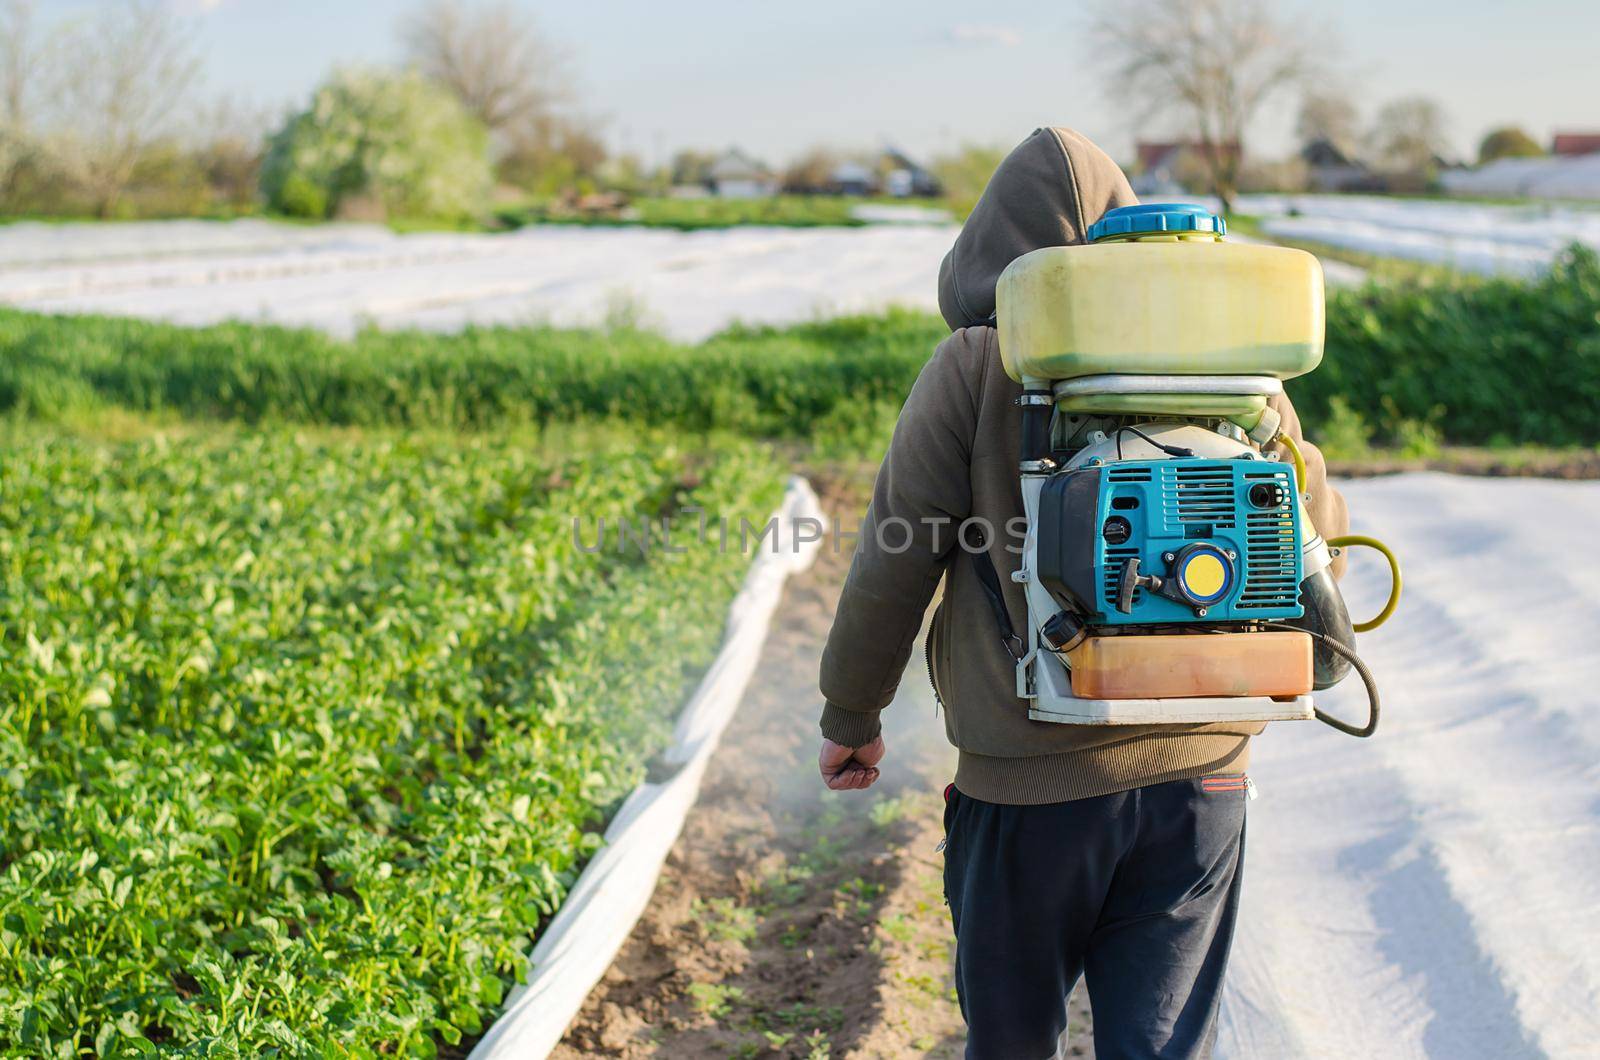 A farmer with a mist fogger sprayer sprays fungicide and pesticide on potato bushes. Protection of cultivated plants from insects and fungal infections. Effective crop protection, environmental impact by iLixe48